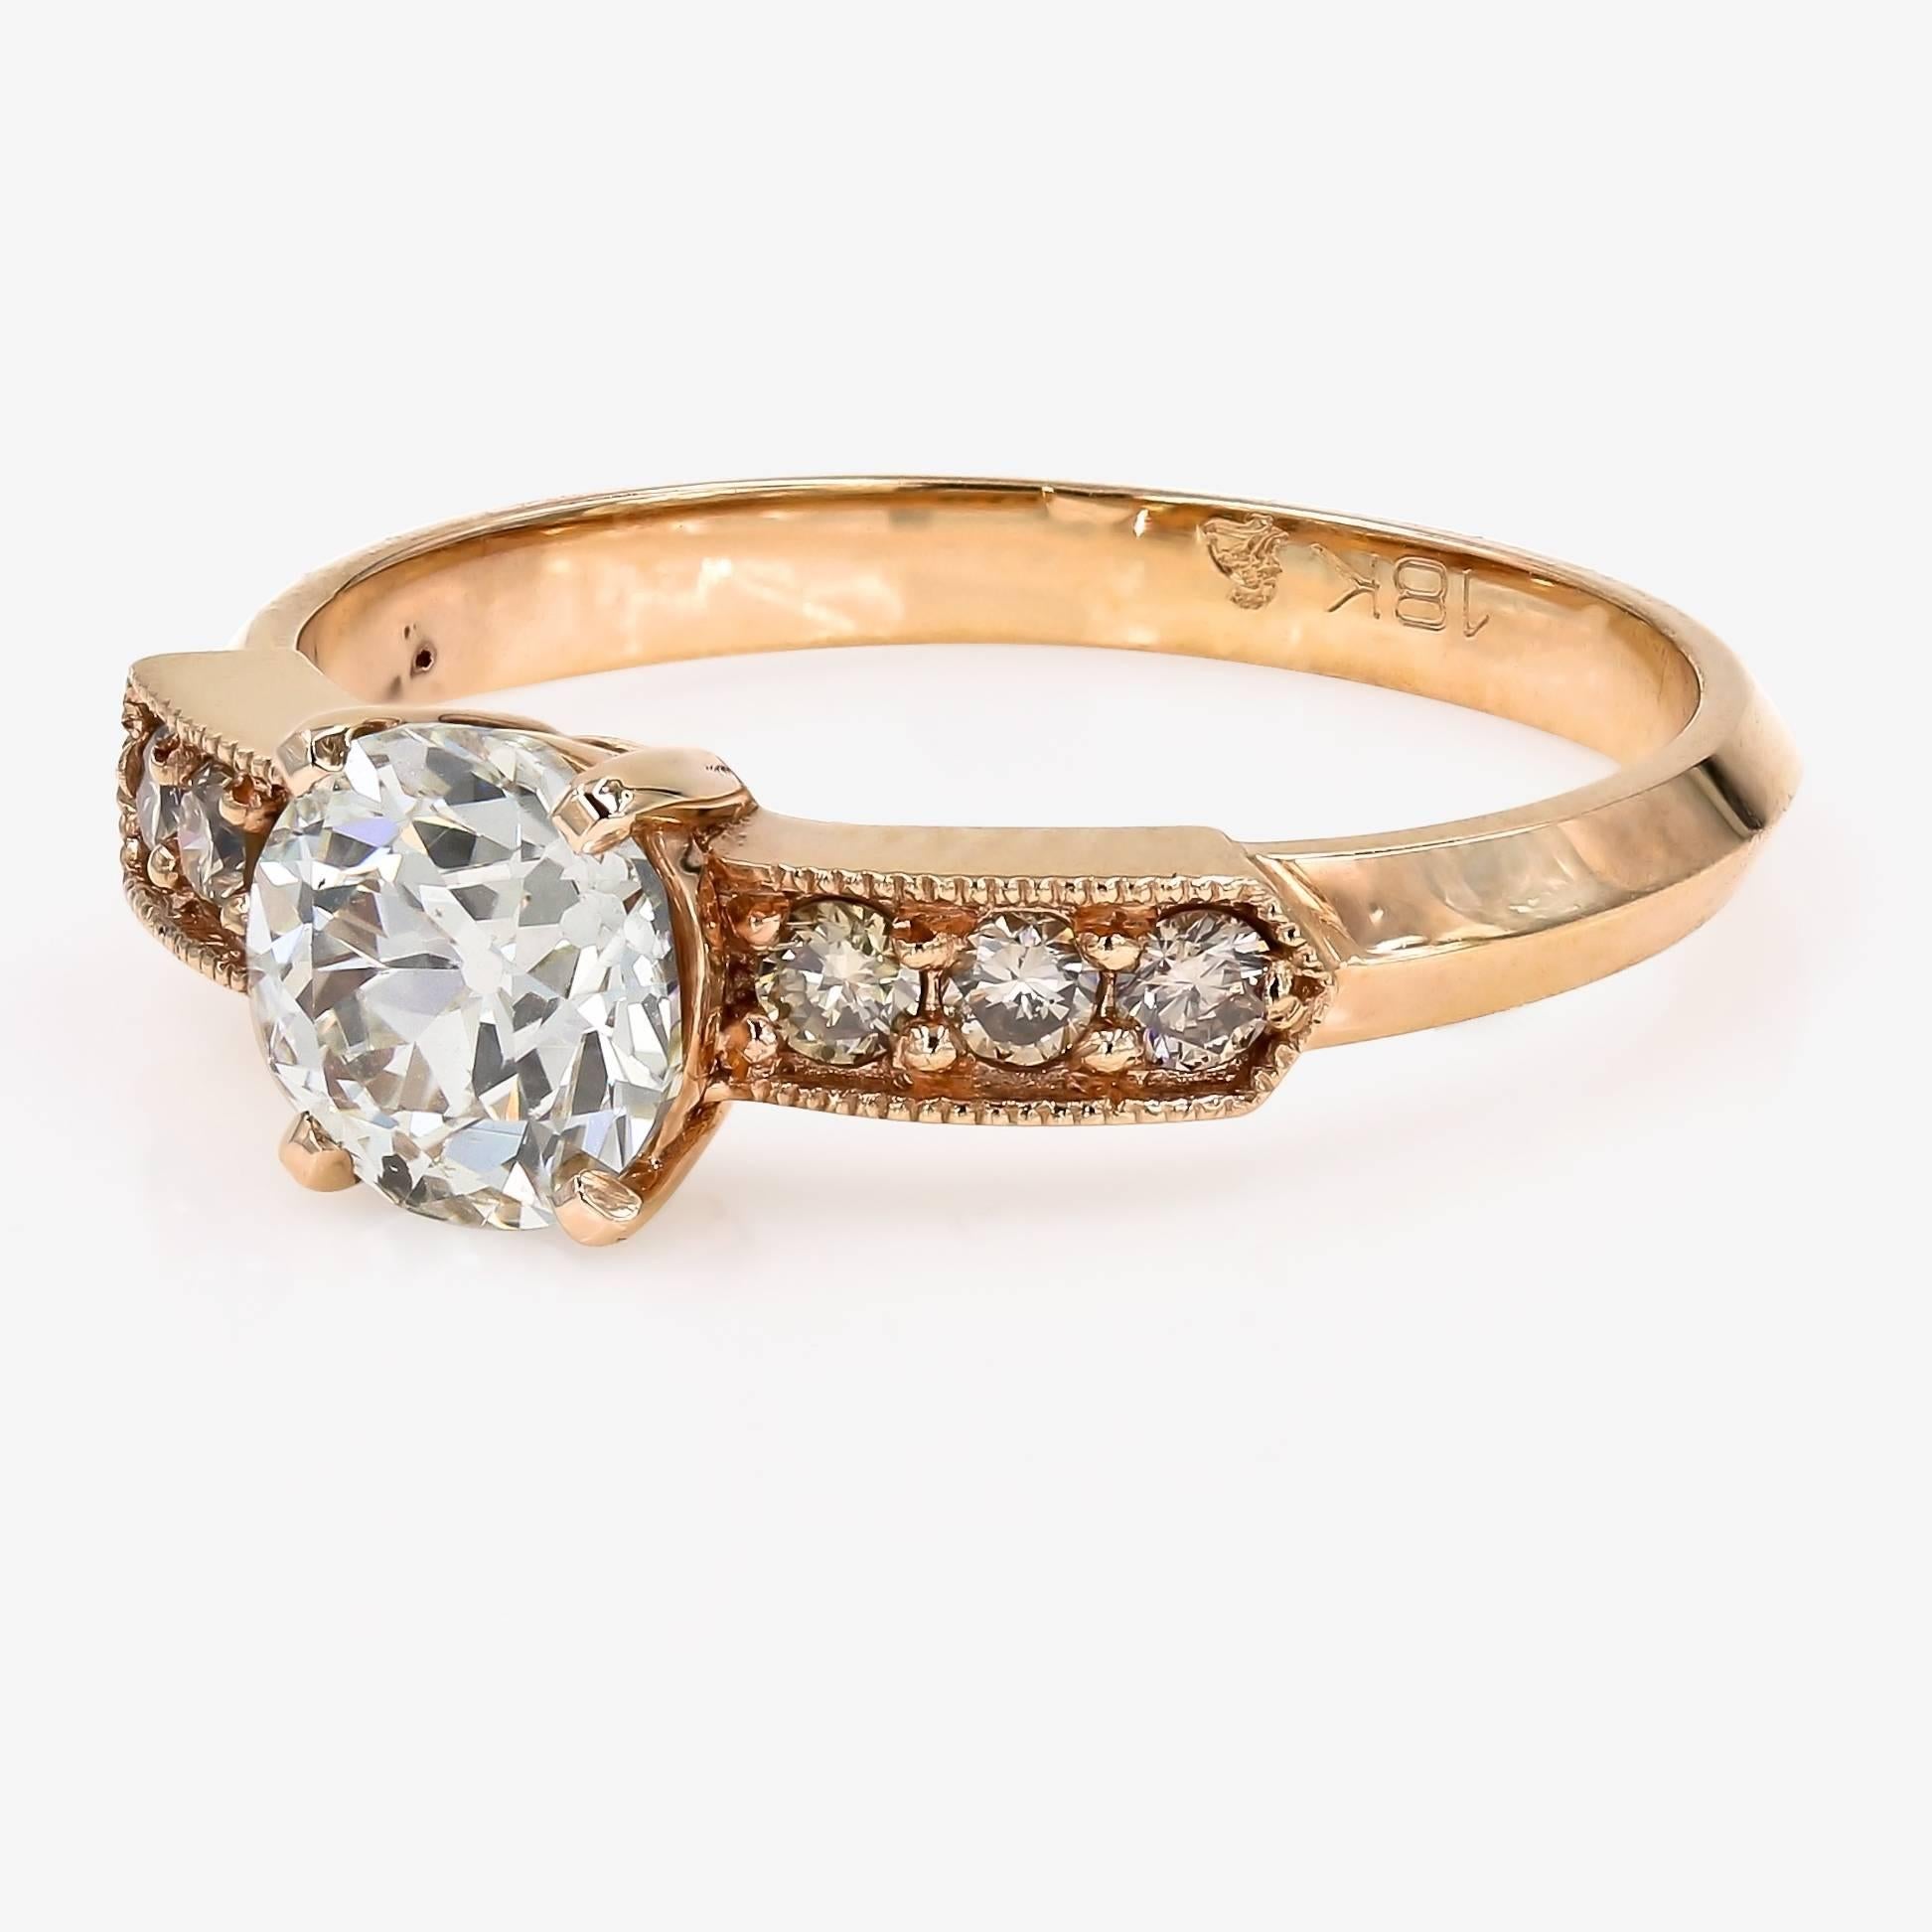 Contemporary GIA Certified 1.08 Carat Old European Cut Round Diamond Ring in Rose Gold